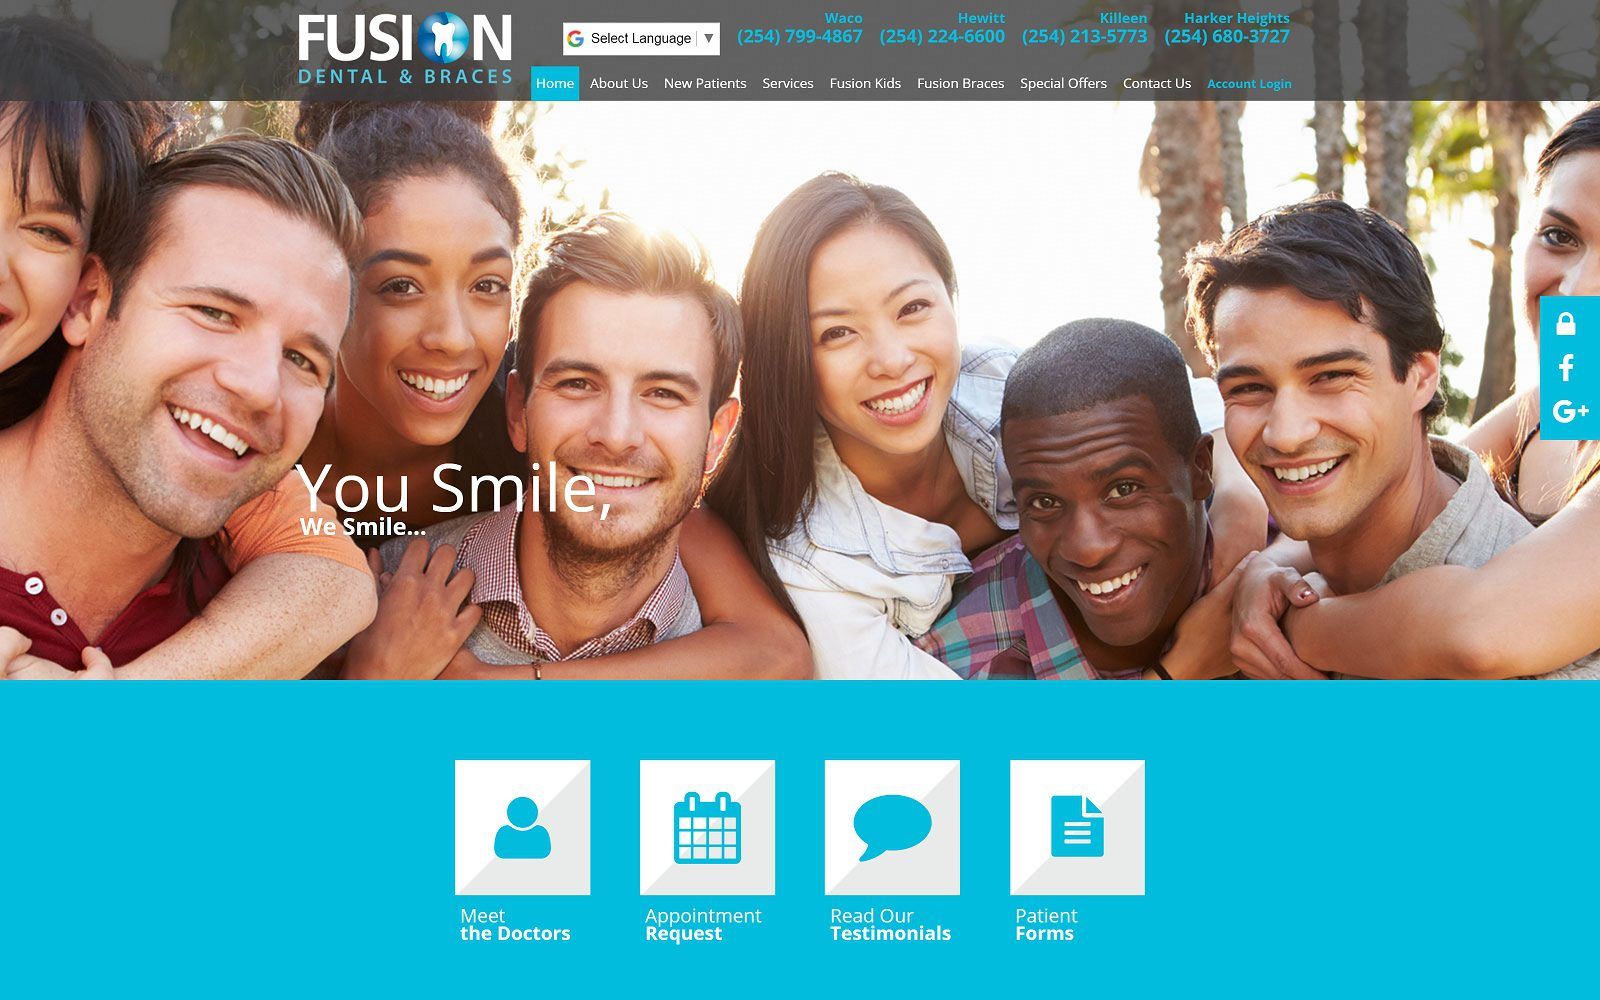 The screenshot of fusion dental & braces at clear creek myfusiondental. Com website